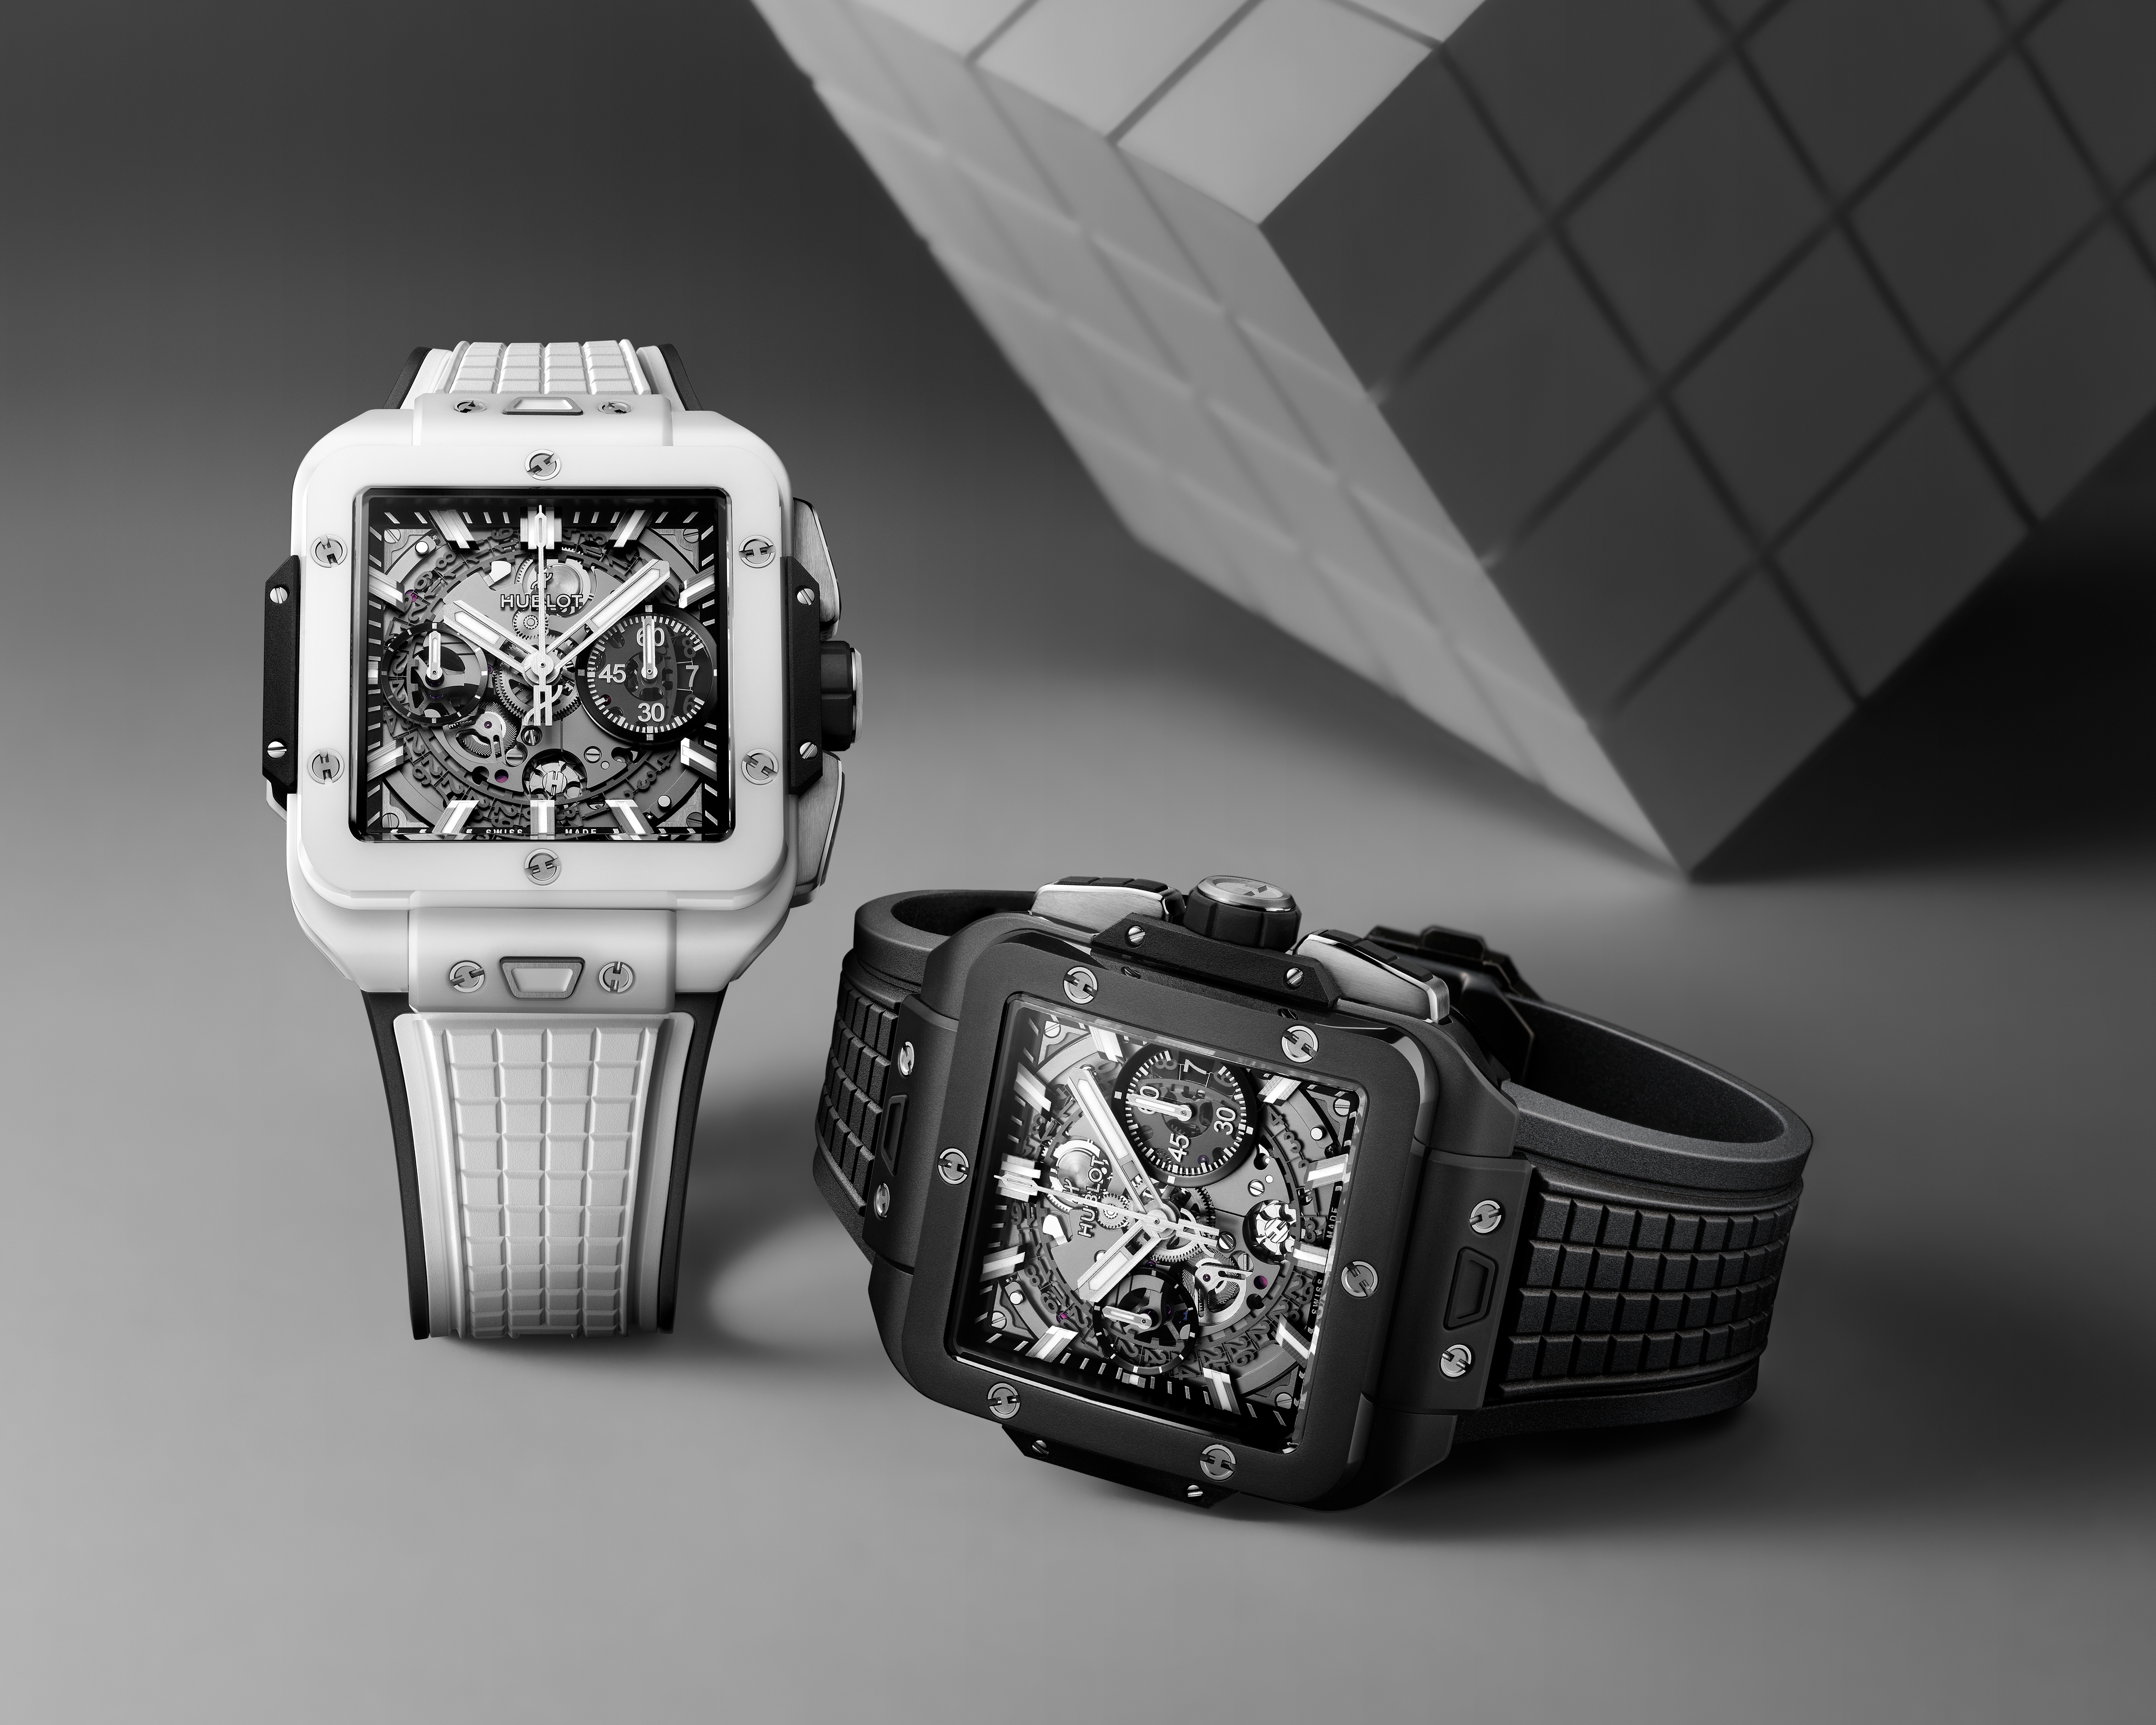 Hublot Square Bang Unico White Gold High Jewellery – The Watch Pages